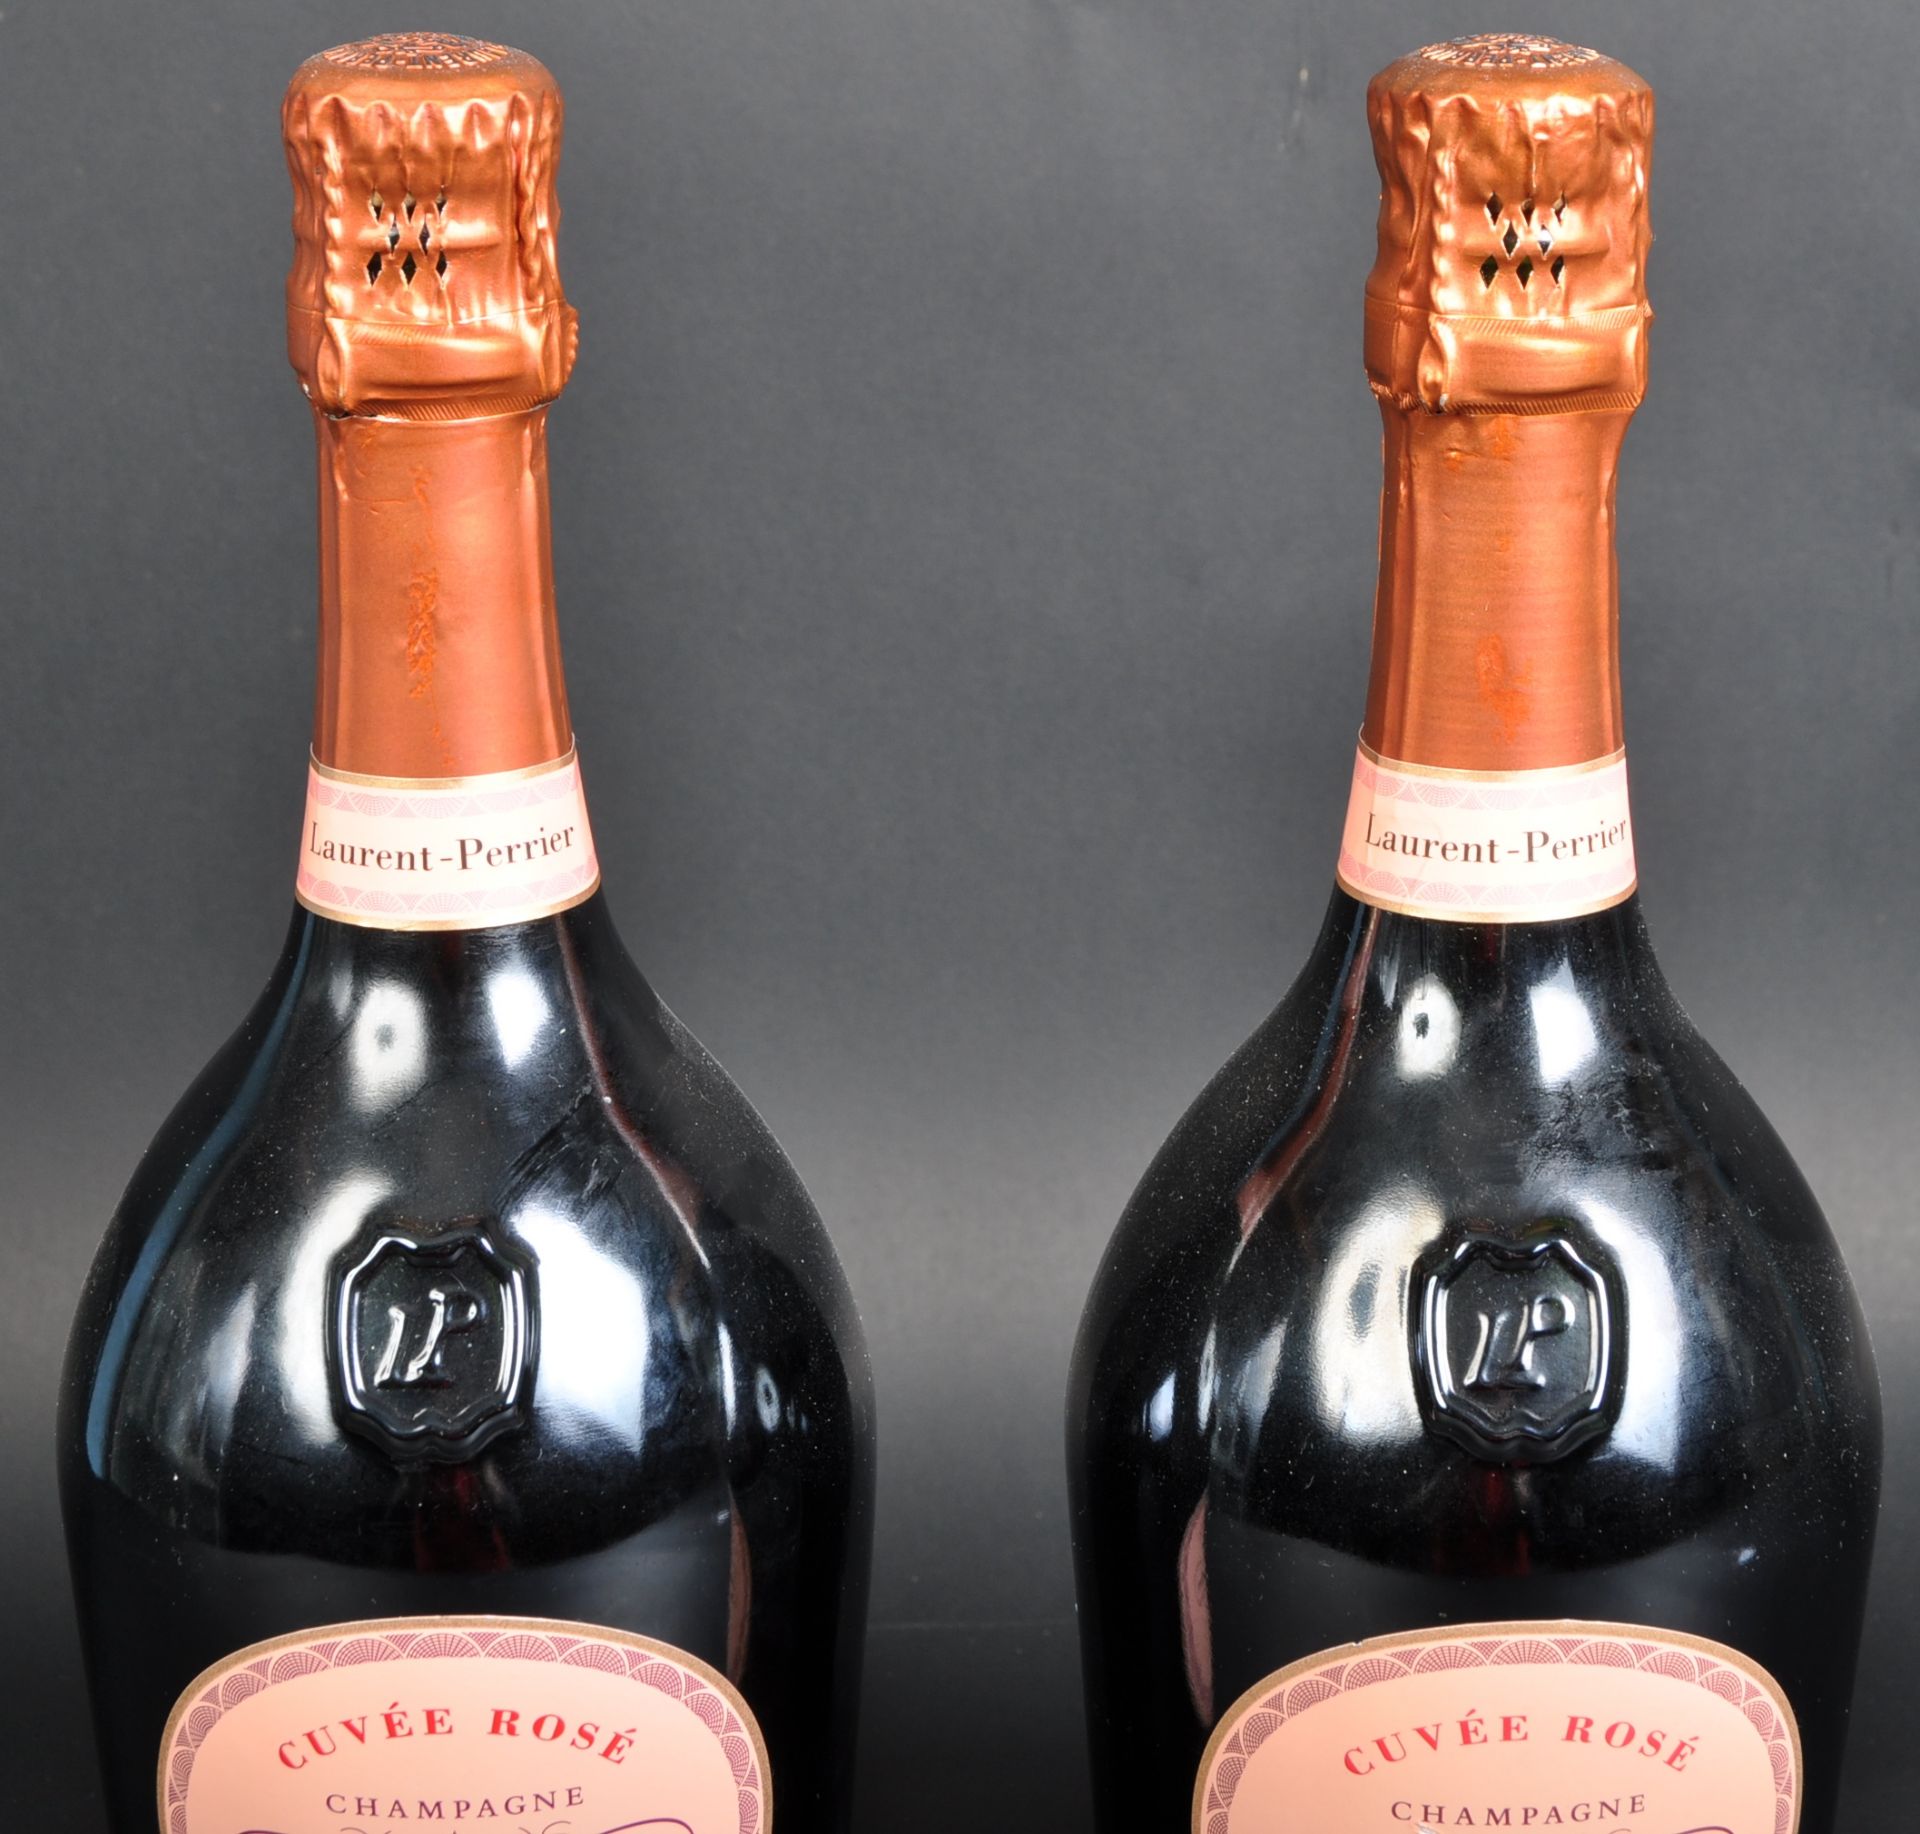 TWO BOTTLES OF 750ML LAURENT-PERRIER CUVEE ROSE CHAMPAGNE - Image 3 of 4